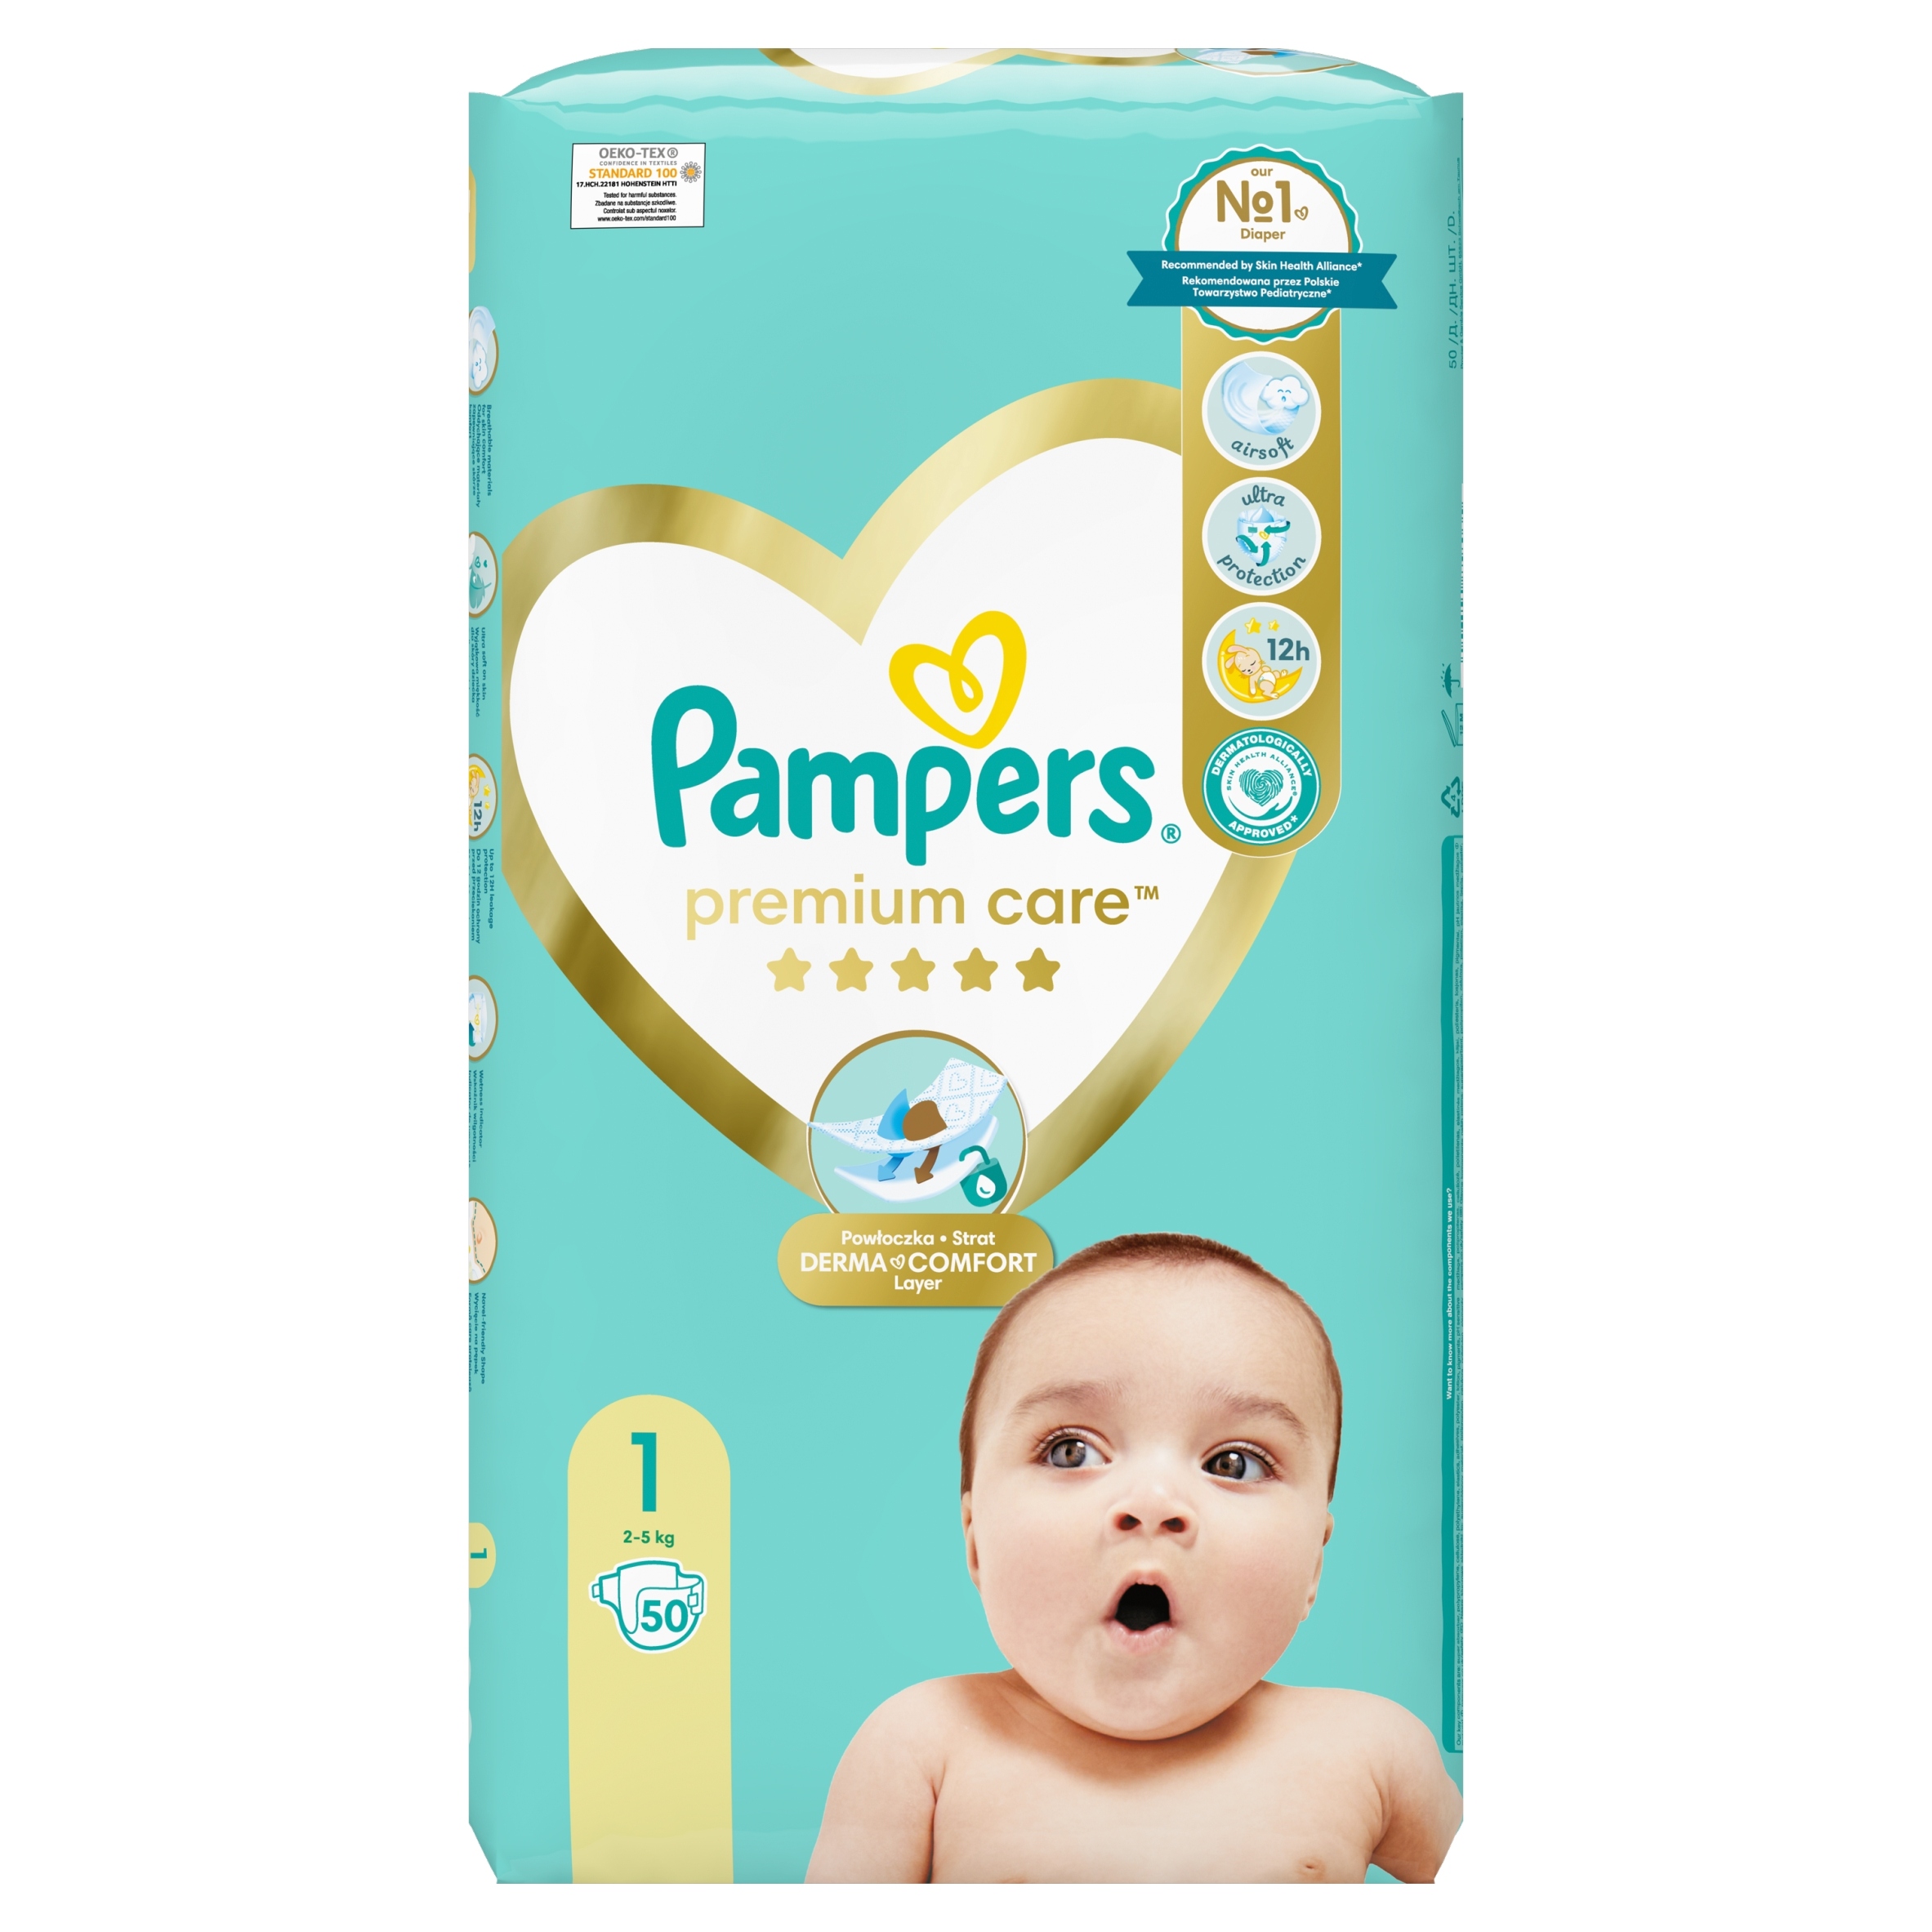 pampers canon ipf605